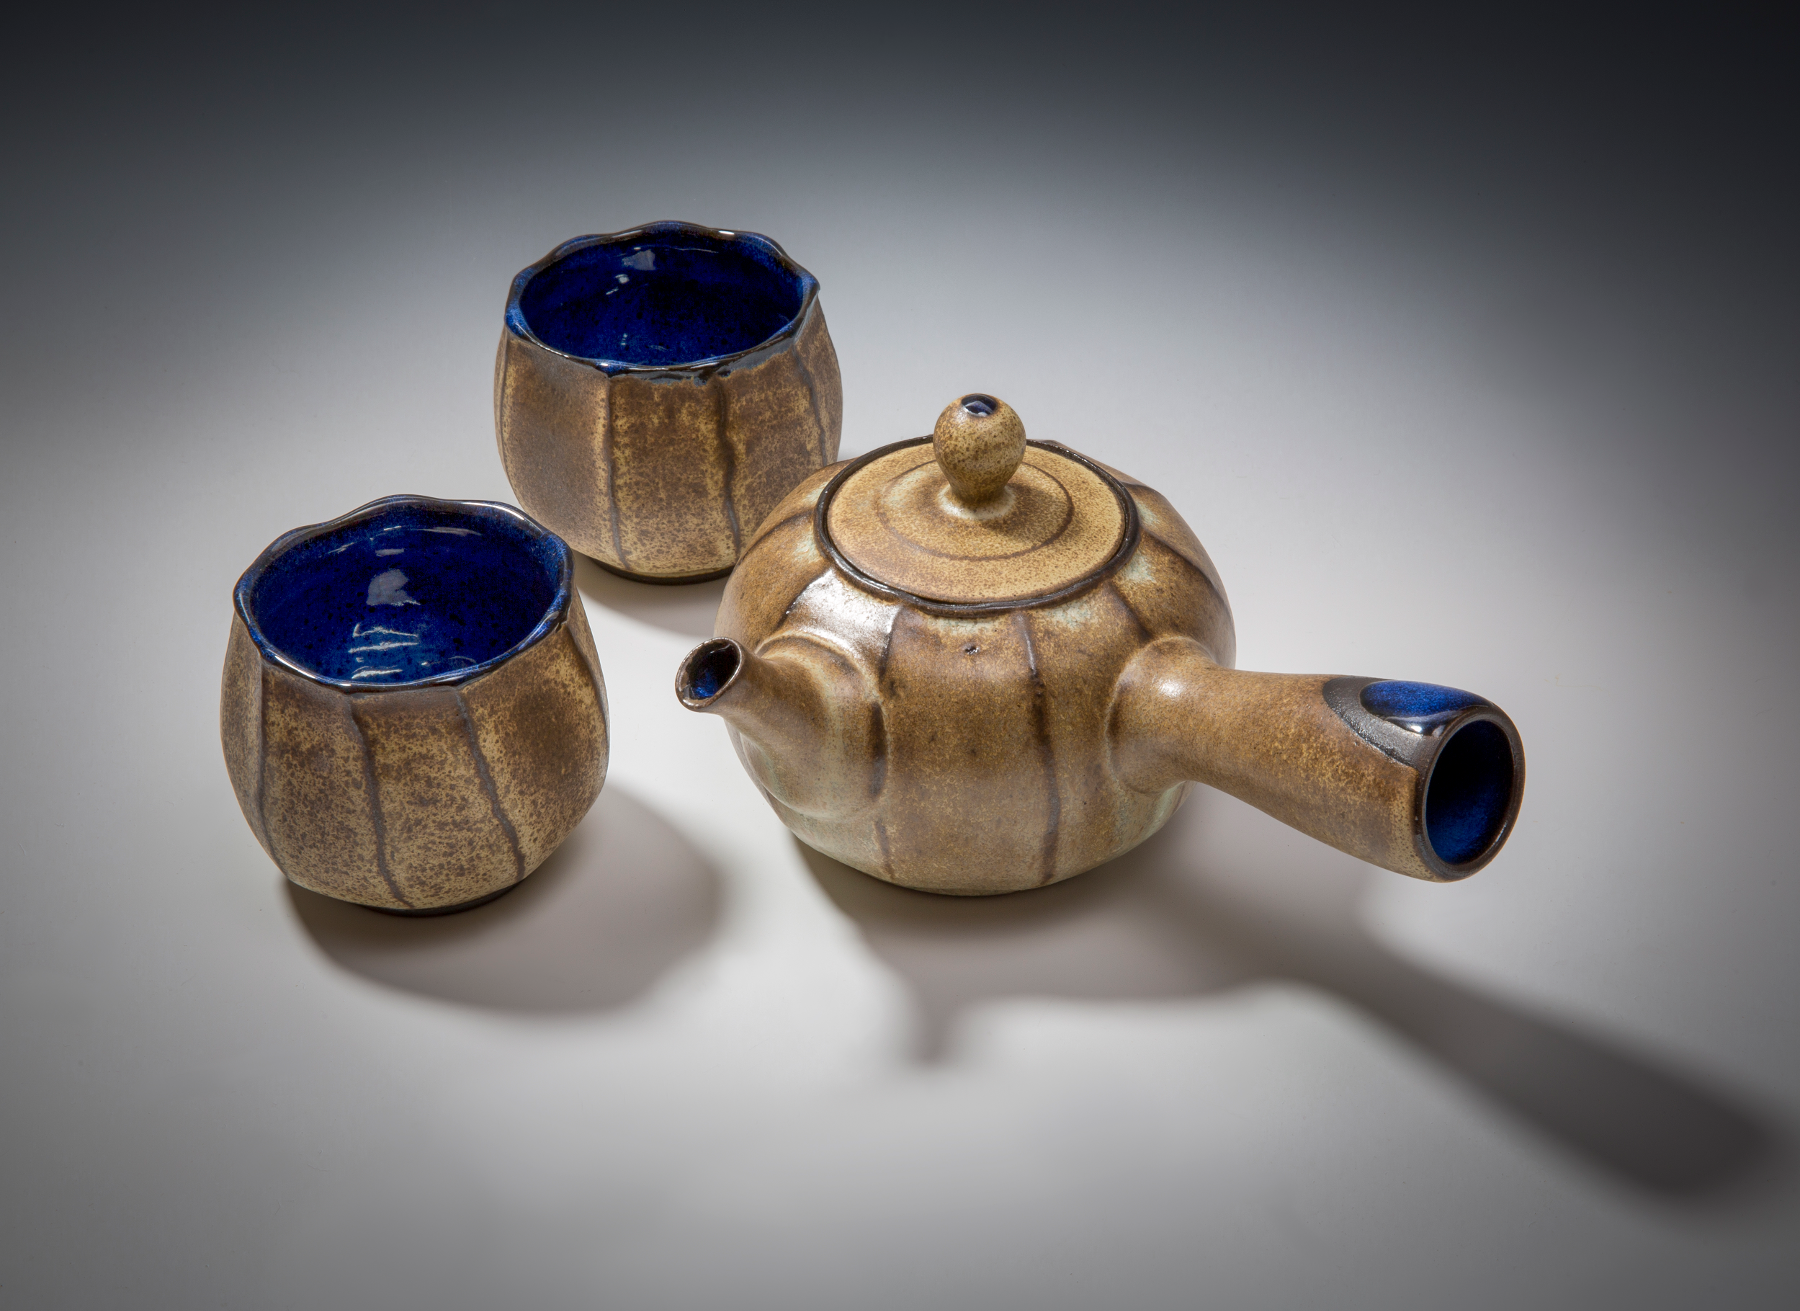 Polina Miller, tea set, teapot: 7 1/2 in. (19 cm) in height; cups 3 1/2 in. (9 cm) in height, wheel-thrown stoneware, fired to cone 6 in oxidation